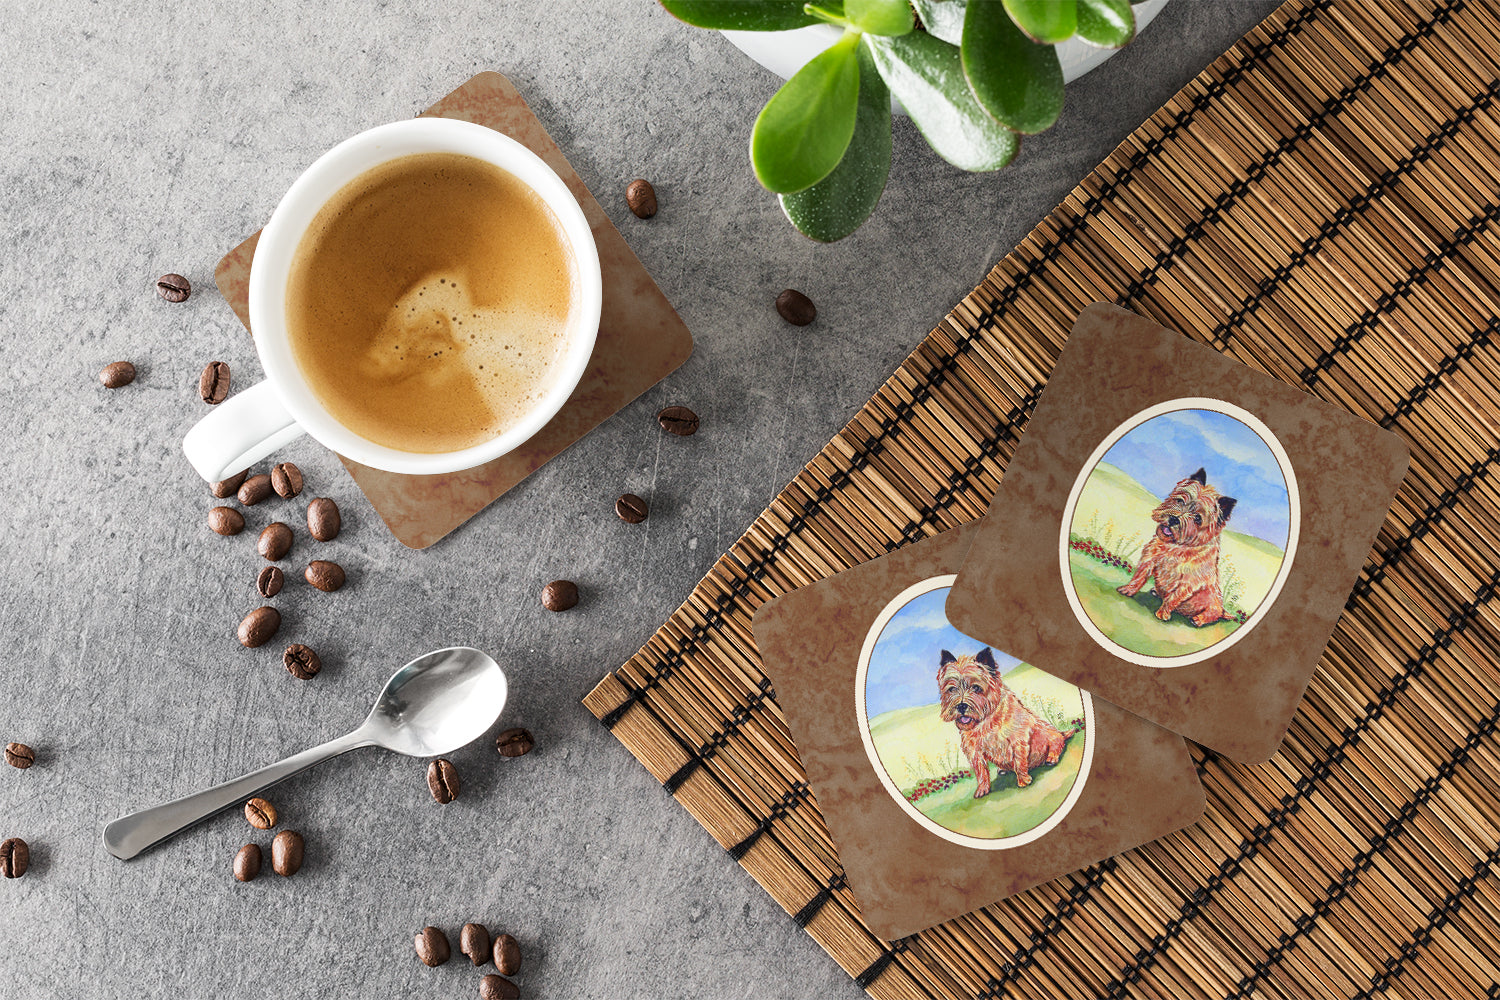 Cairn Terrier and the Chipmunk Foam Coaster Set of 4 7017FC - the-store.com